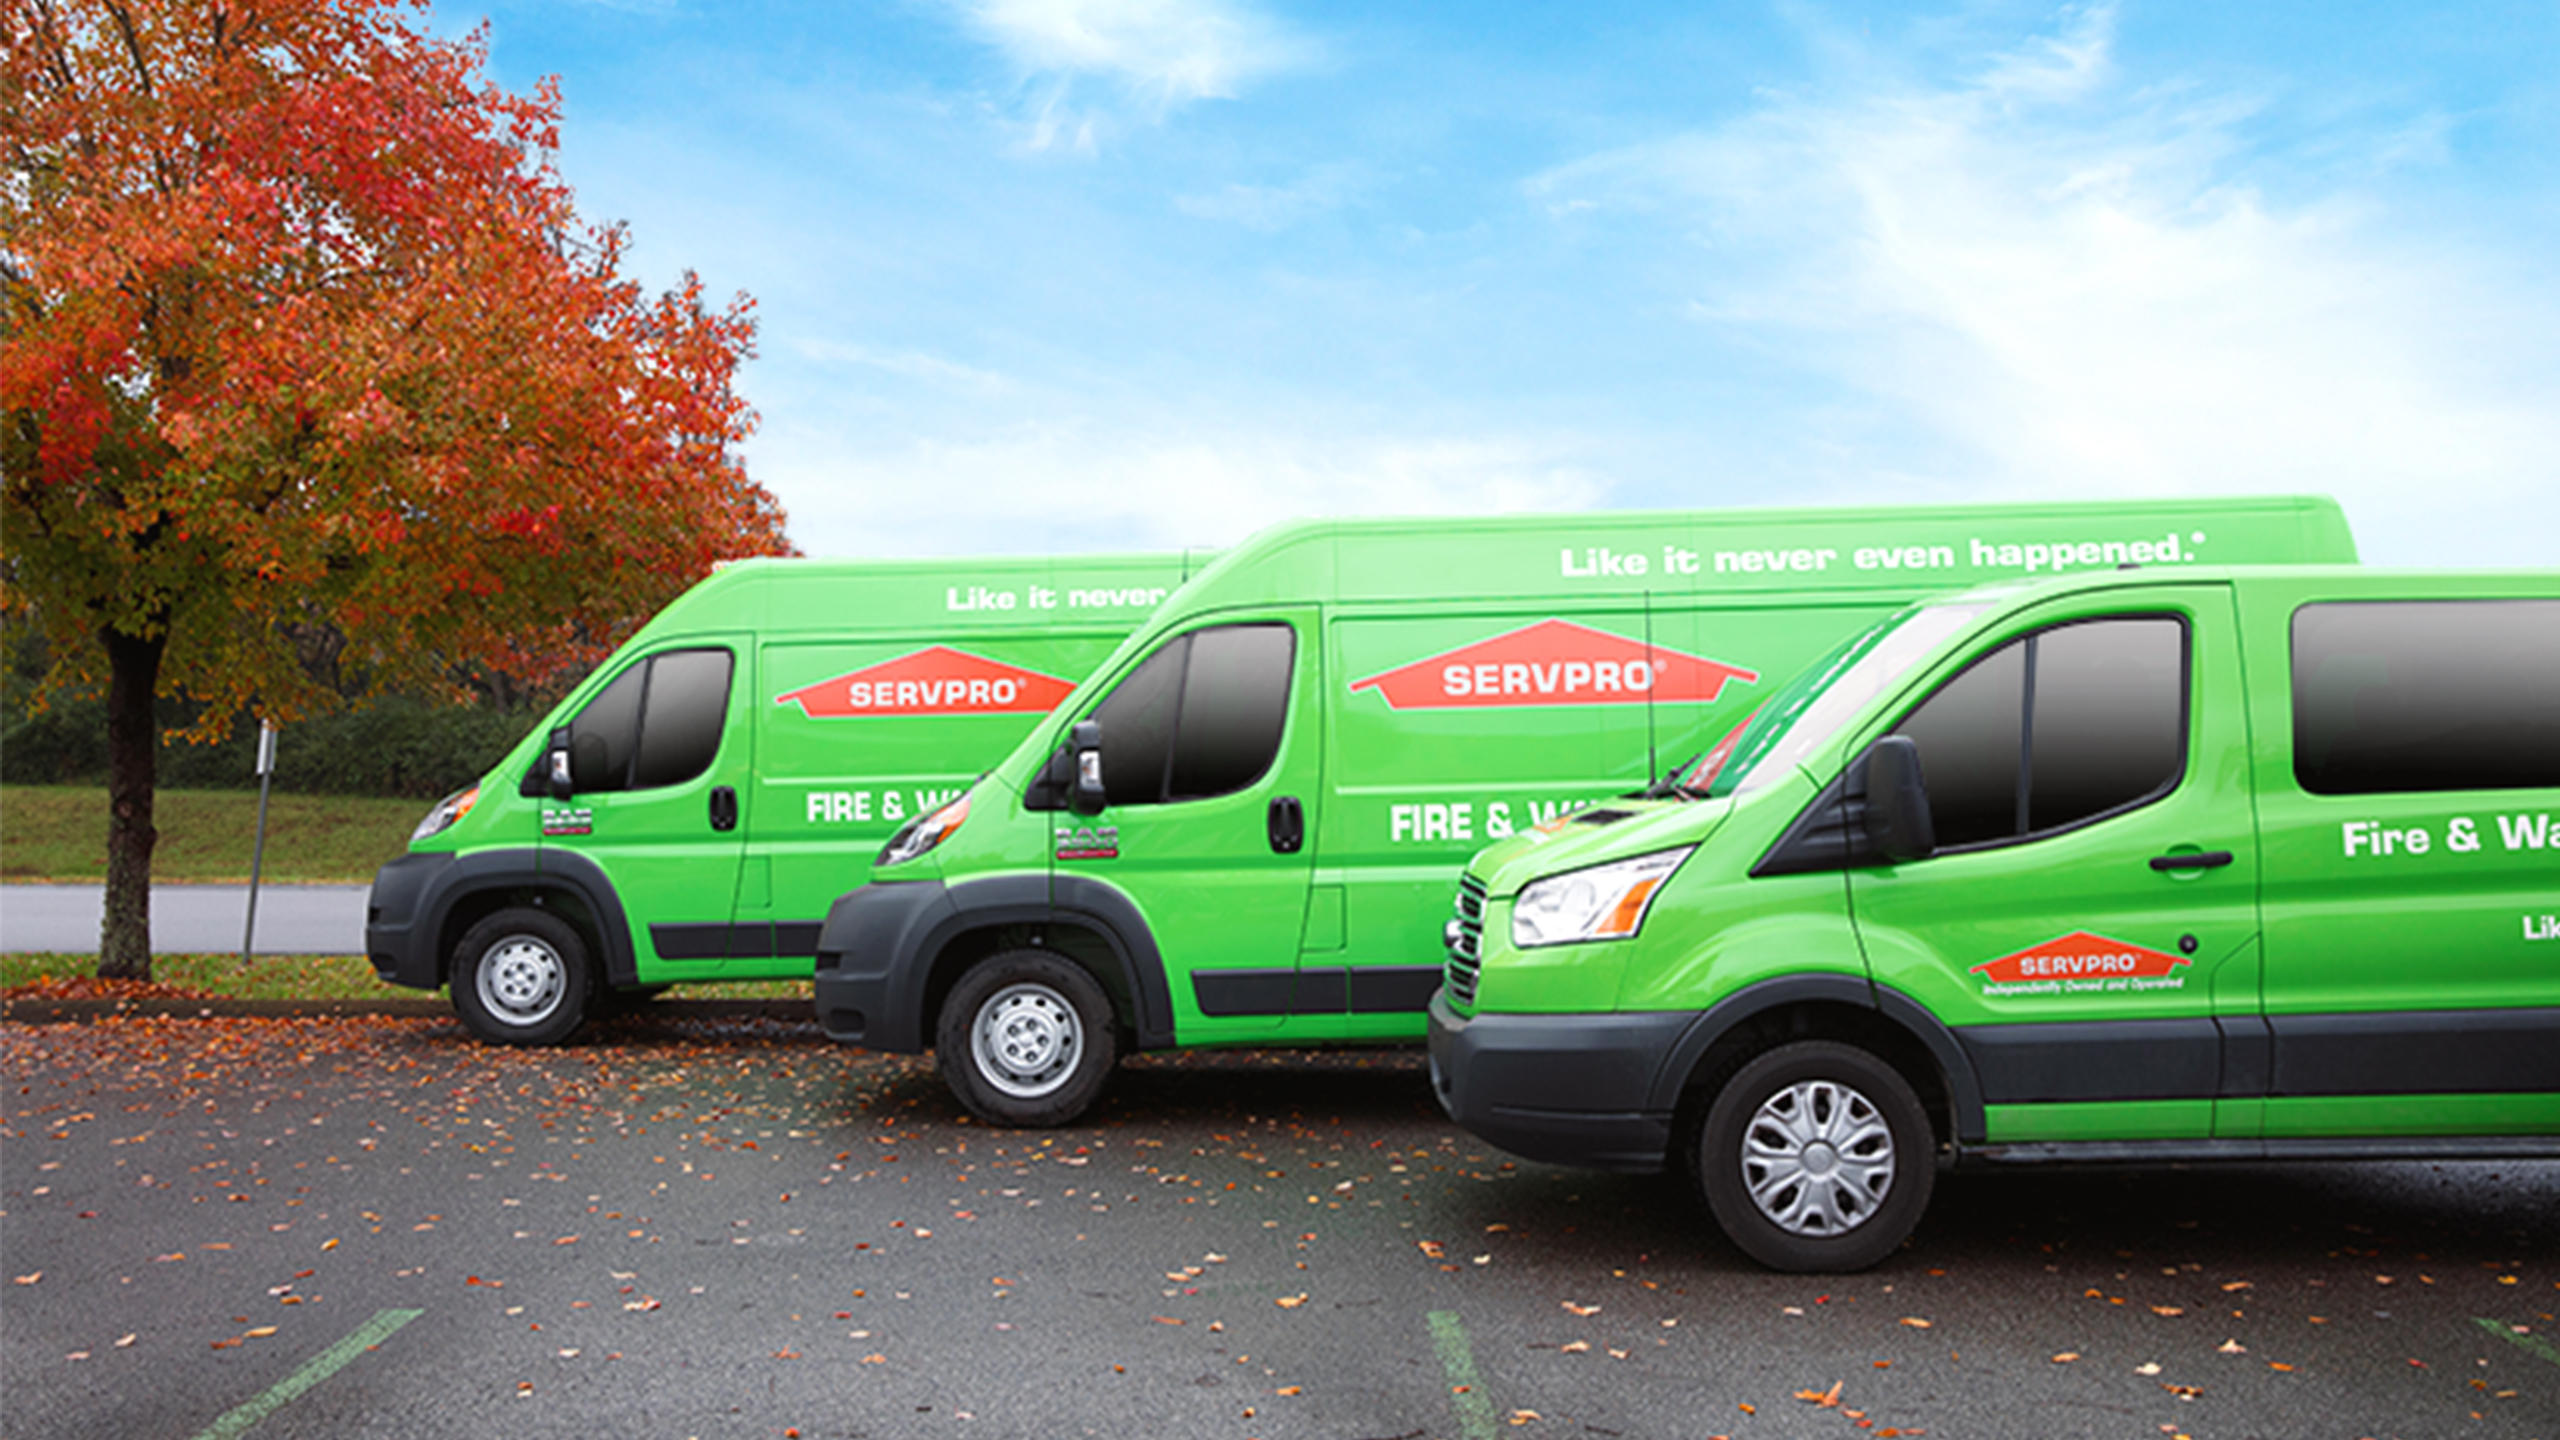 SERVPRO of South Durham and Orange County has been a trusted leader in the restoration industry since 2000 and we have highly trained technicians that are dedicated to responding faster to any disaster no matter the size, residential or commercial. As a locally owned and operated business we are dedicated to serving our neighbors and providing 24-hour emergency service any day of the week. All our technicians are highly trained, equipped with an extensive variety of advanced tools and equipment and have experience to deal with the various disasters and to manage your restoration and cleaning.

Our goal in every project that we take on is to leave the client happy and very satisfied with the result being "Like it never even happened."